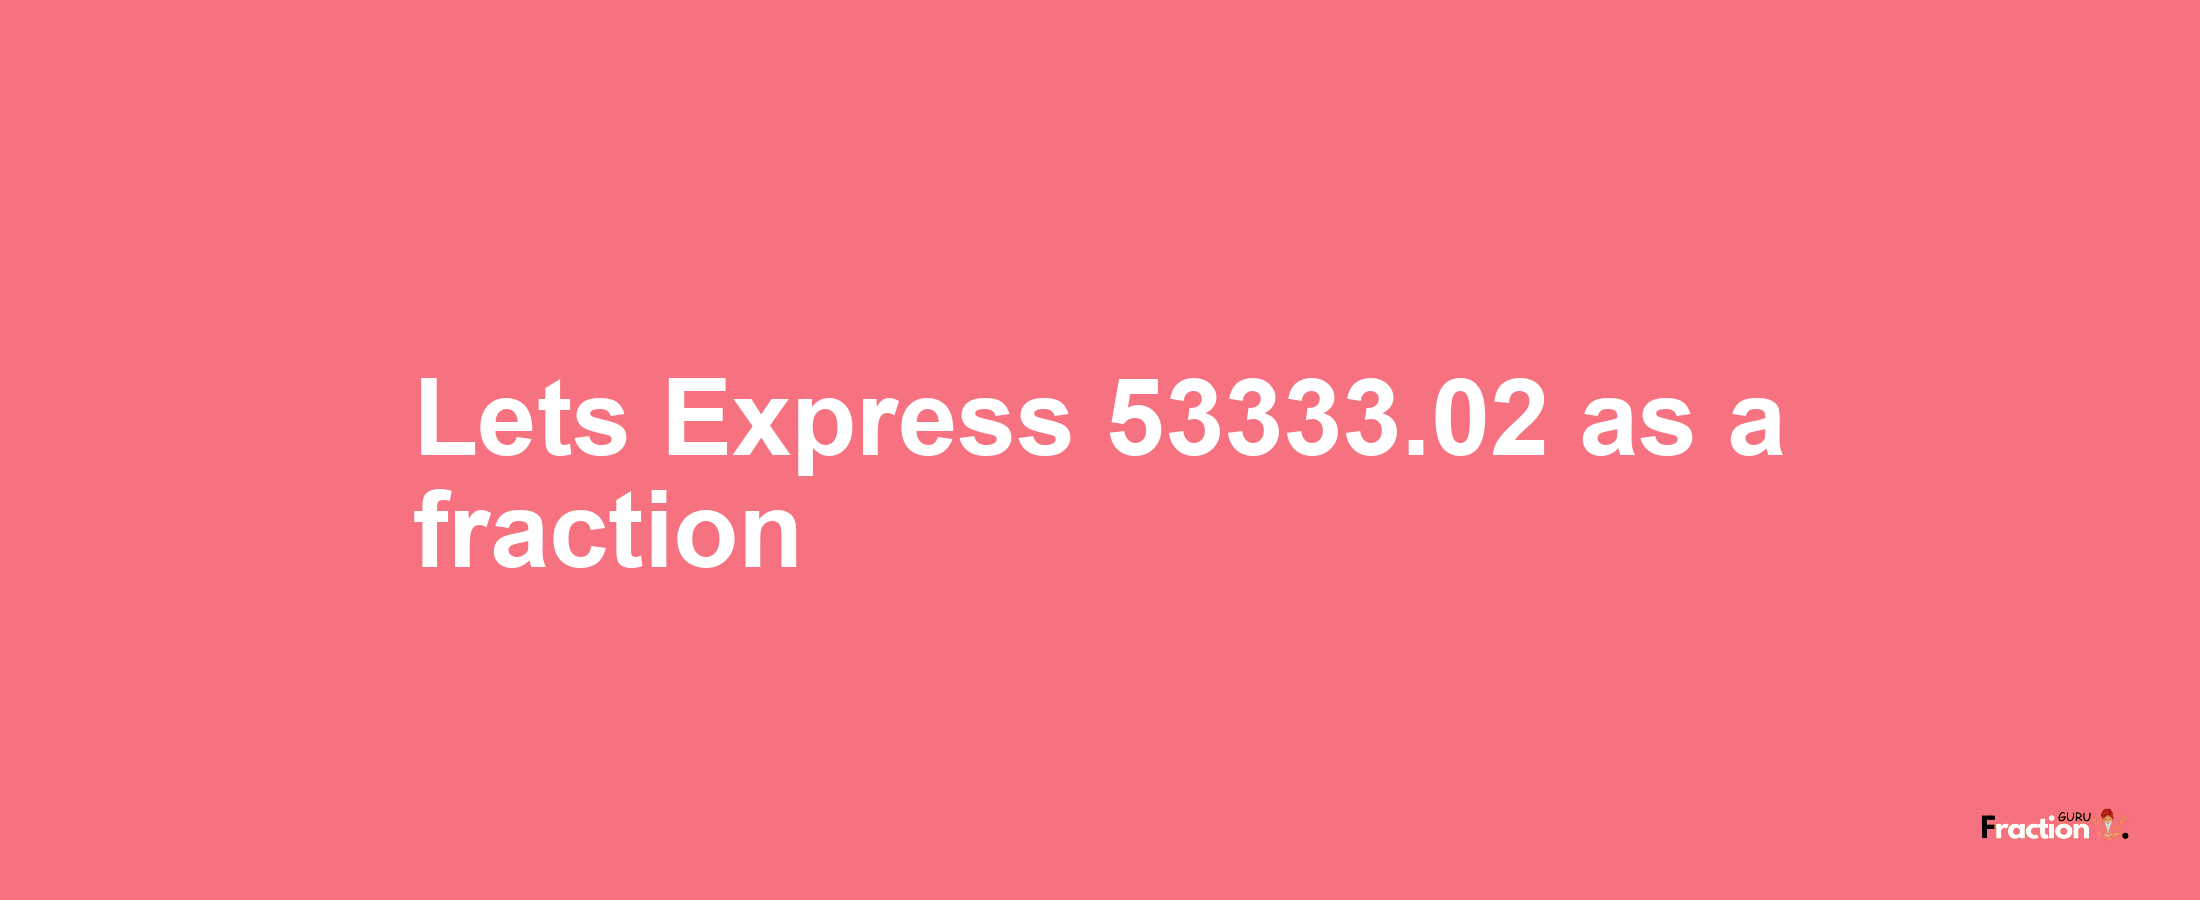 Lets Express 53333.02 as afraction